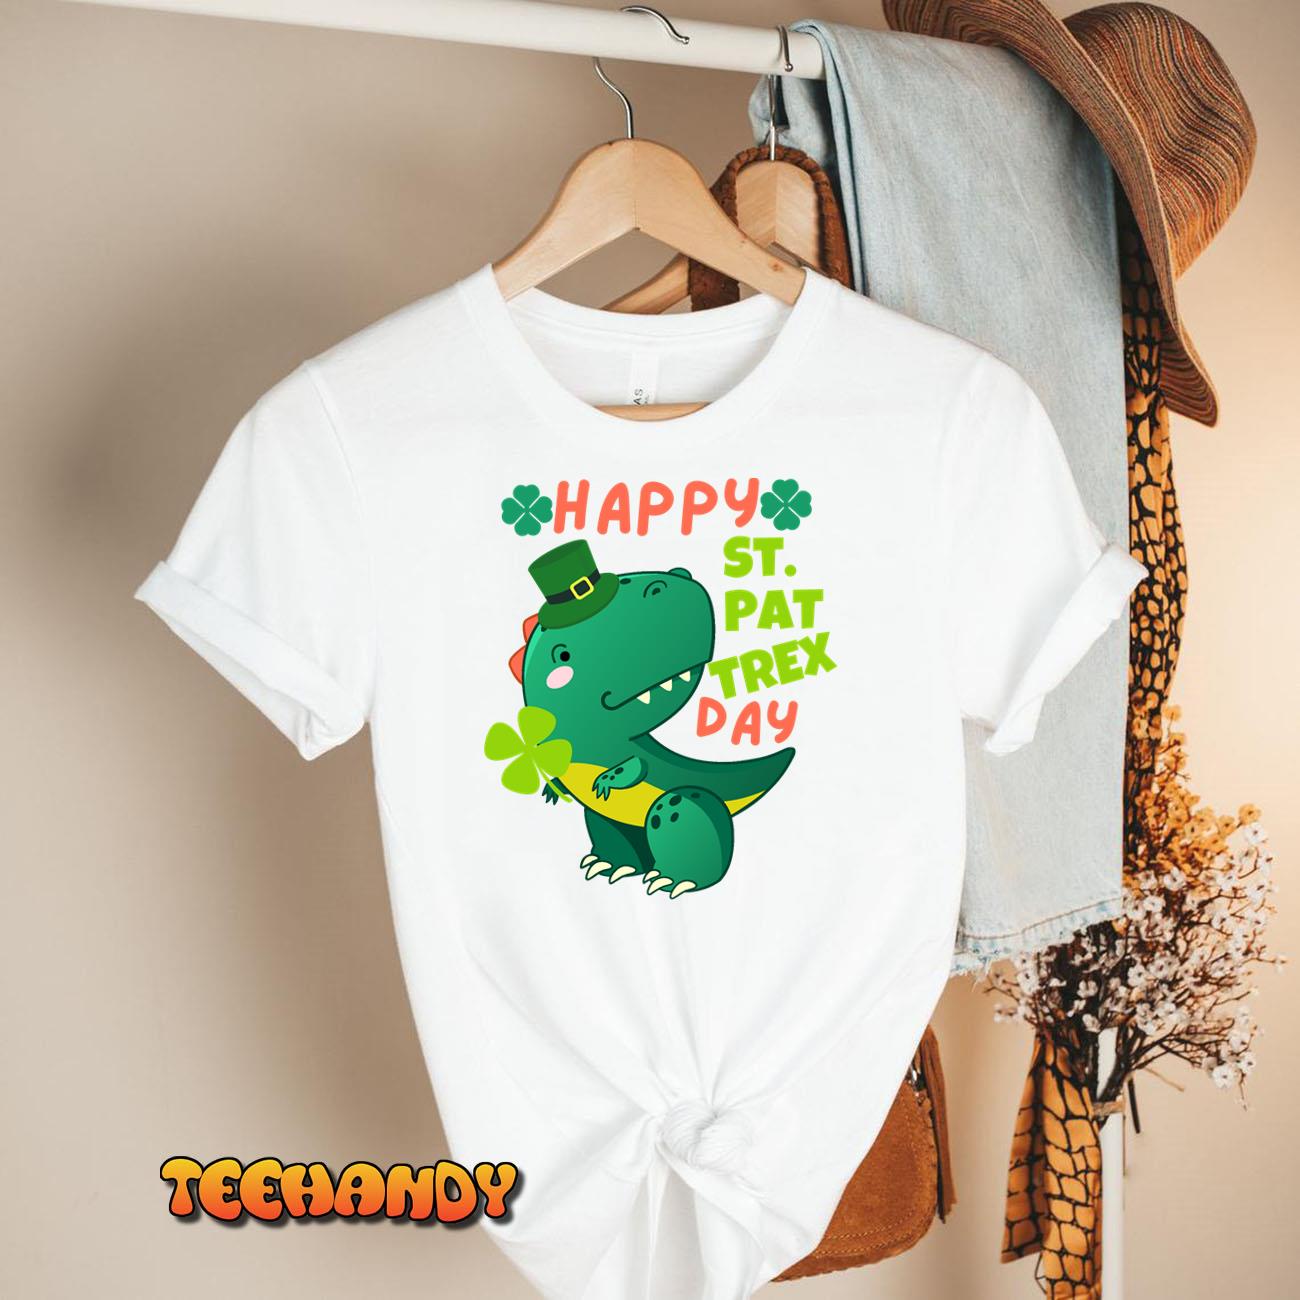 Happy St. Pattrex Day, Cute and Funny Dinosaur for St. Patrick’s Day T-Shirt